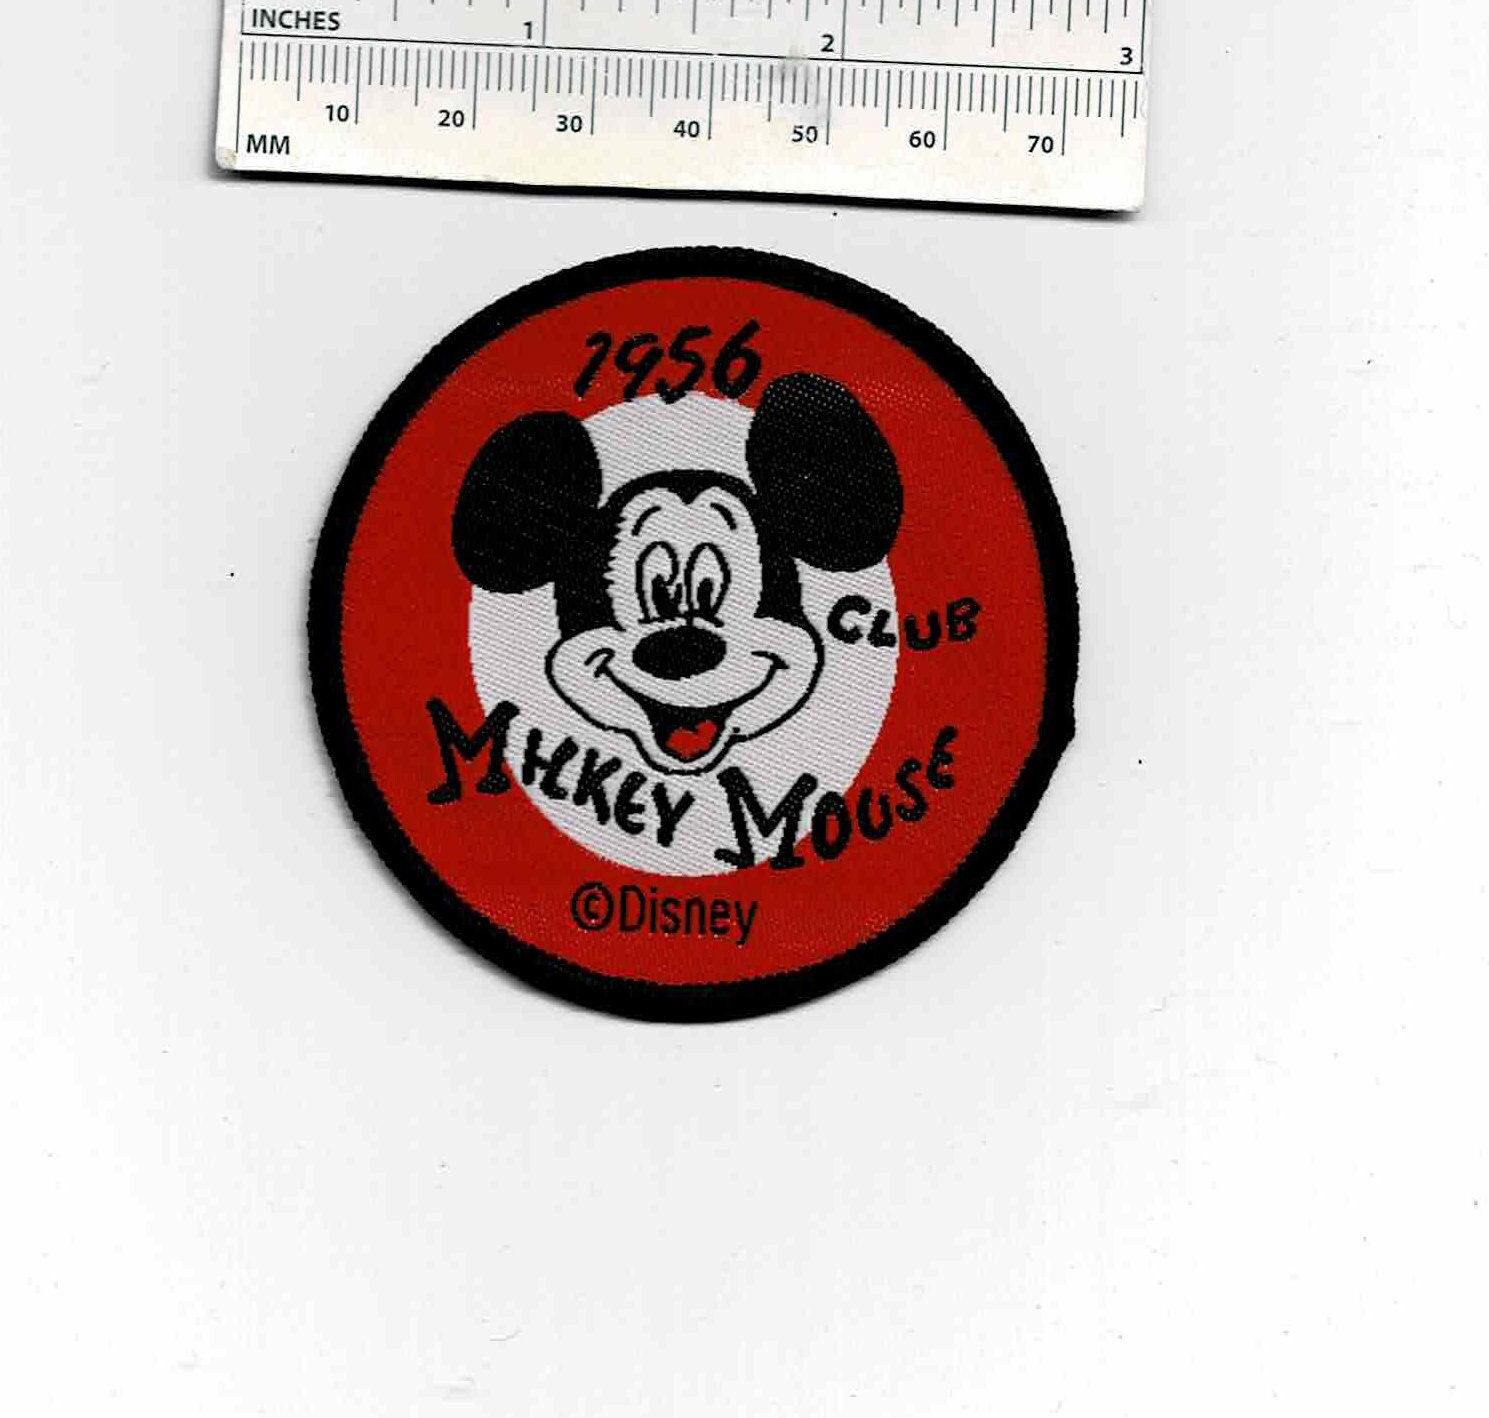 Vintage Disney's California Adventure Enginear in Training Iron-on Patch  Rare Disney Mickey Mouse Souvenir Patch 